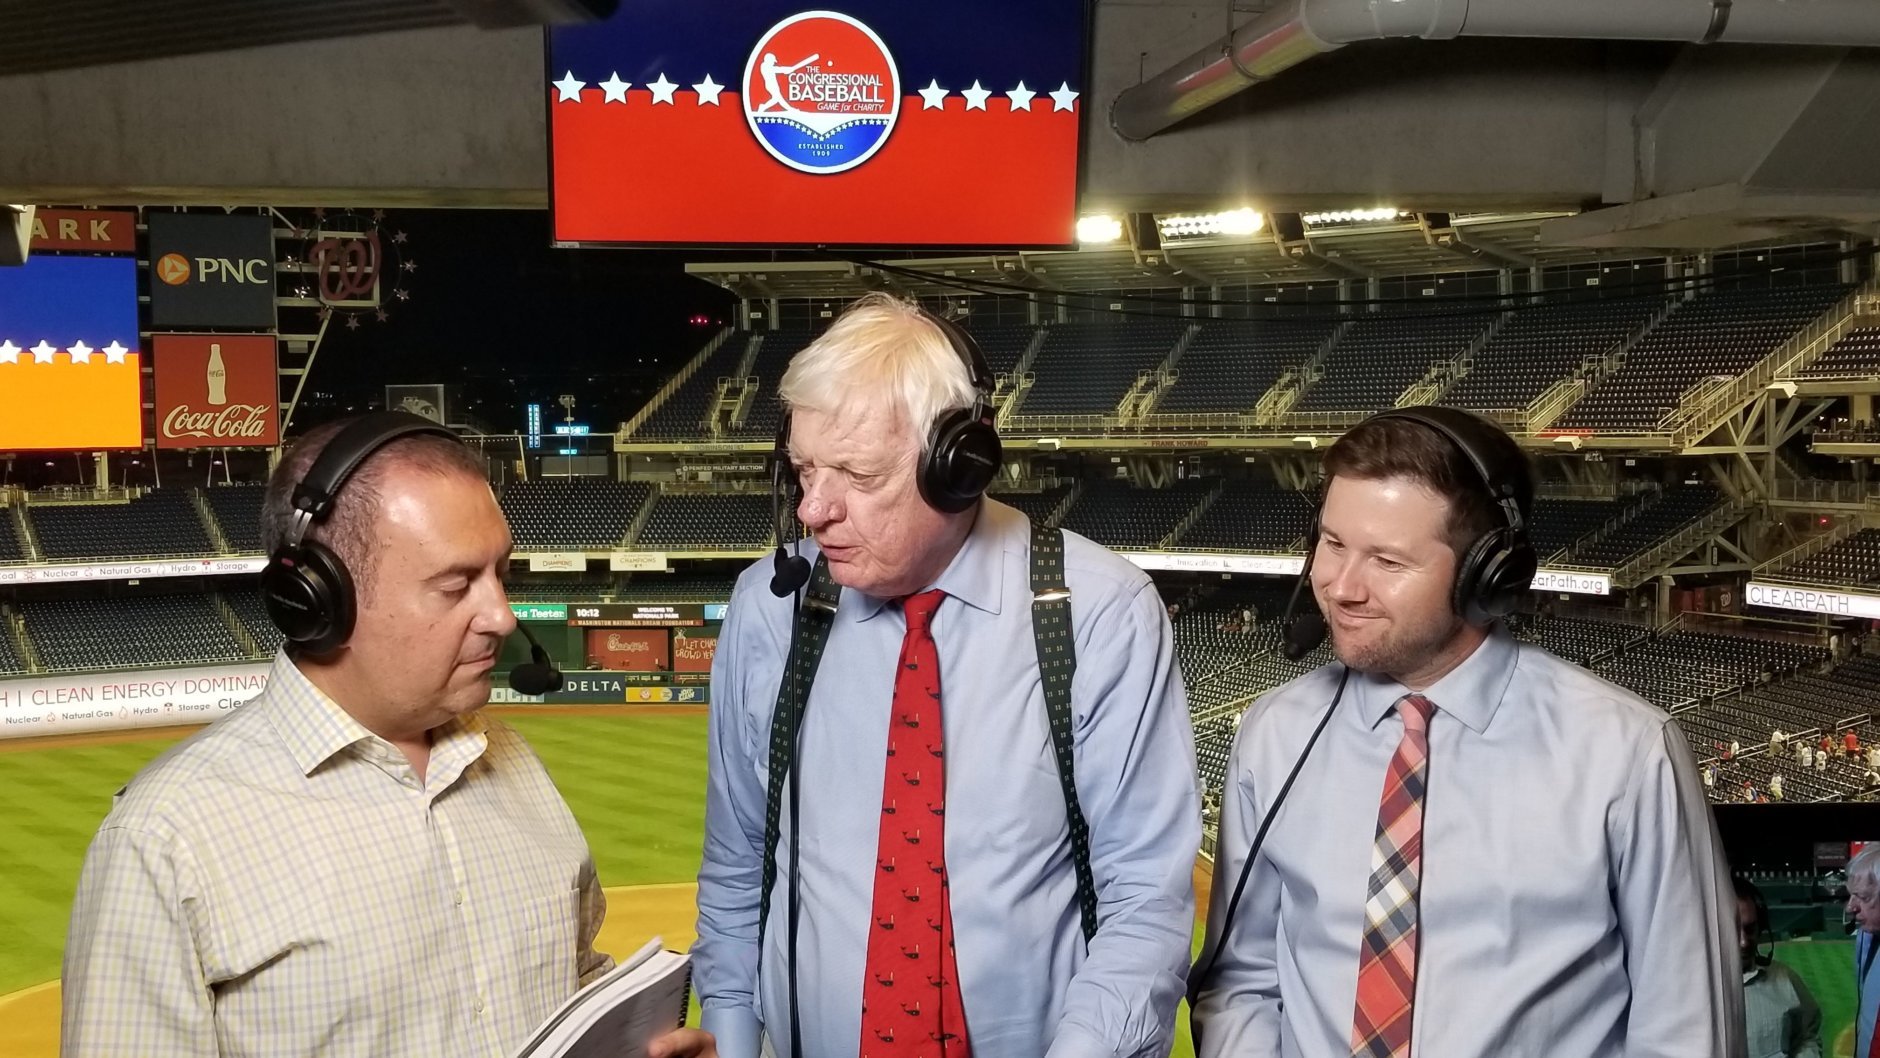 WTOP's George Wallace, Dave McConnell and Noah Frank call the Congressional Baseball Game on Thursday, June 14, 2018. (WTOP/Albert Shimabukuro)